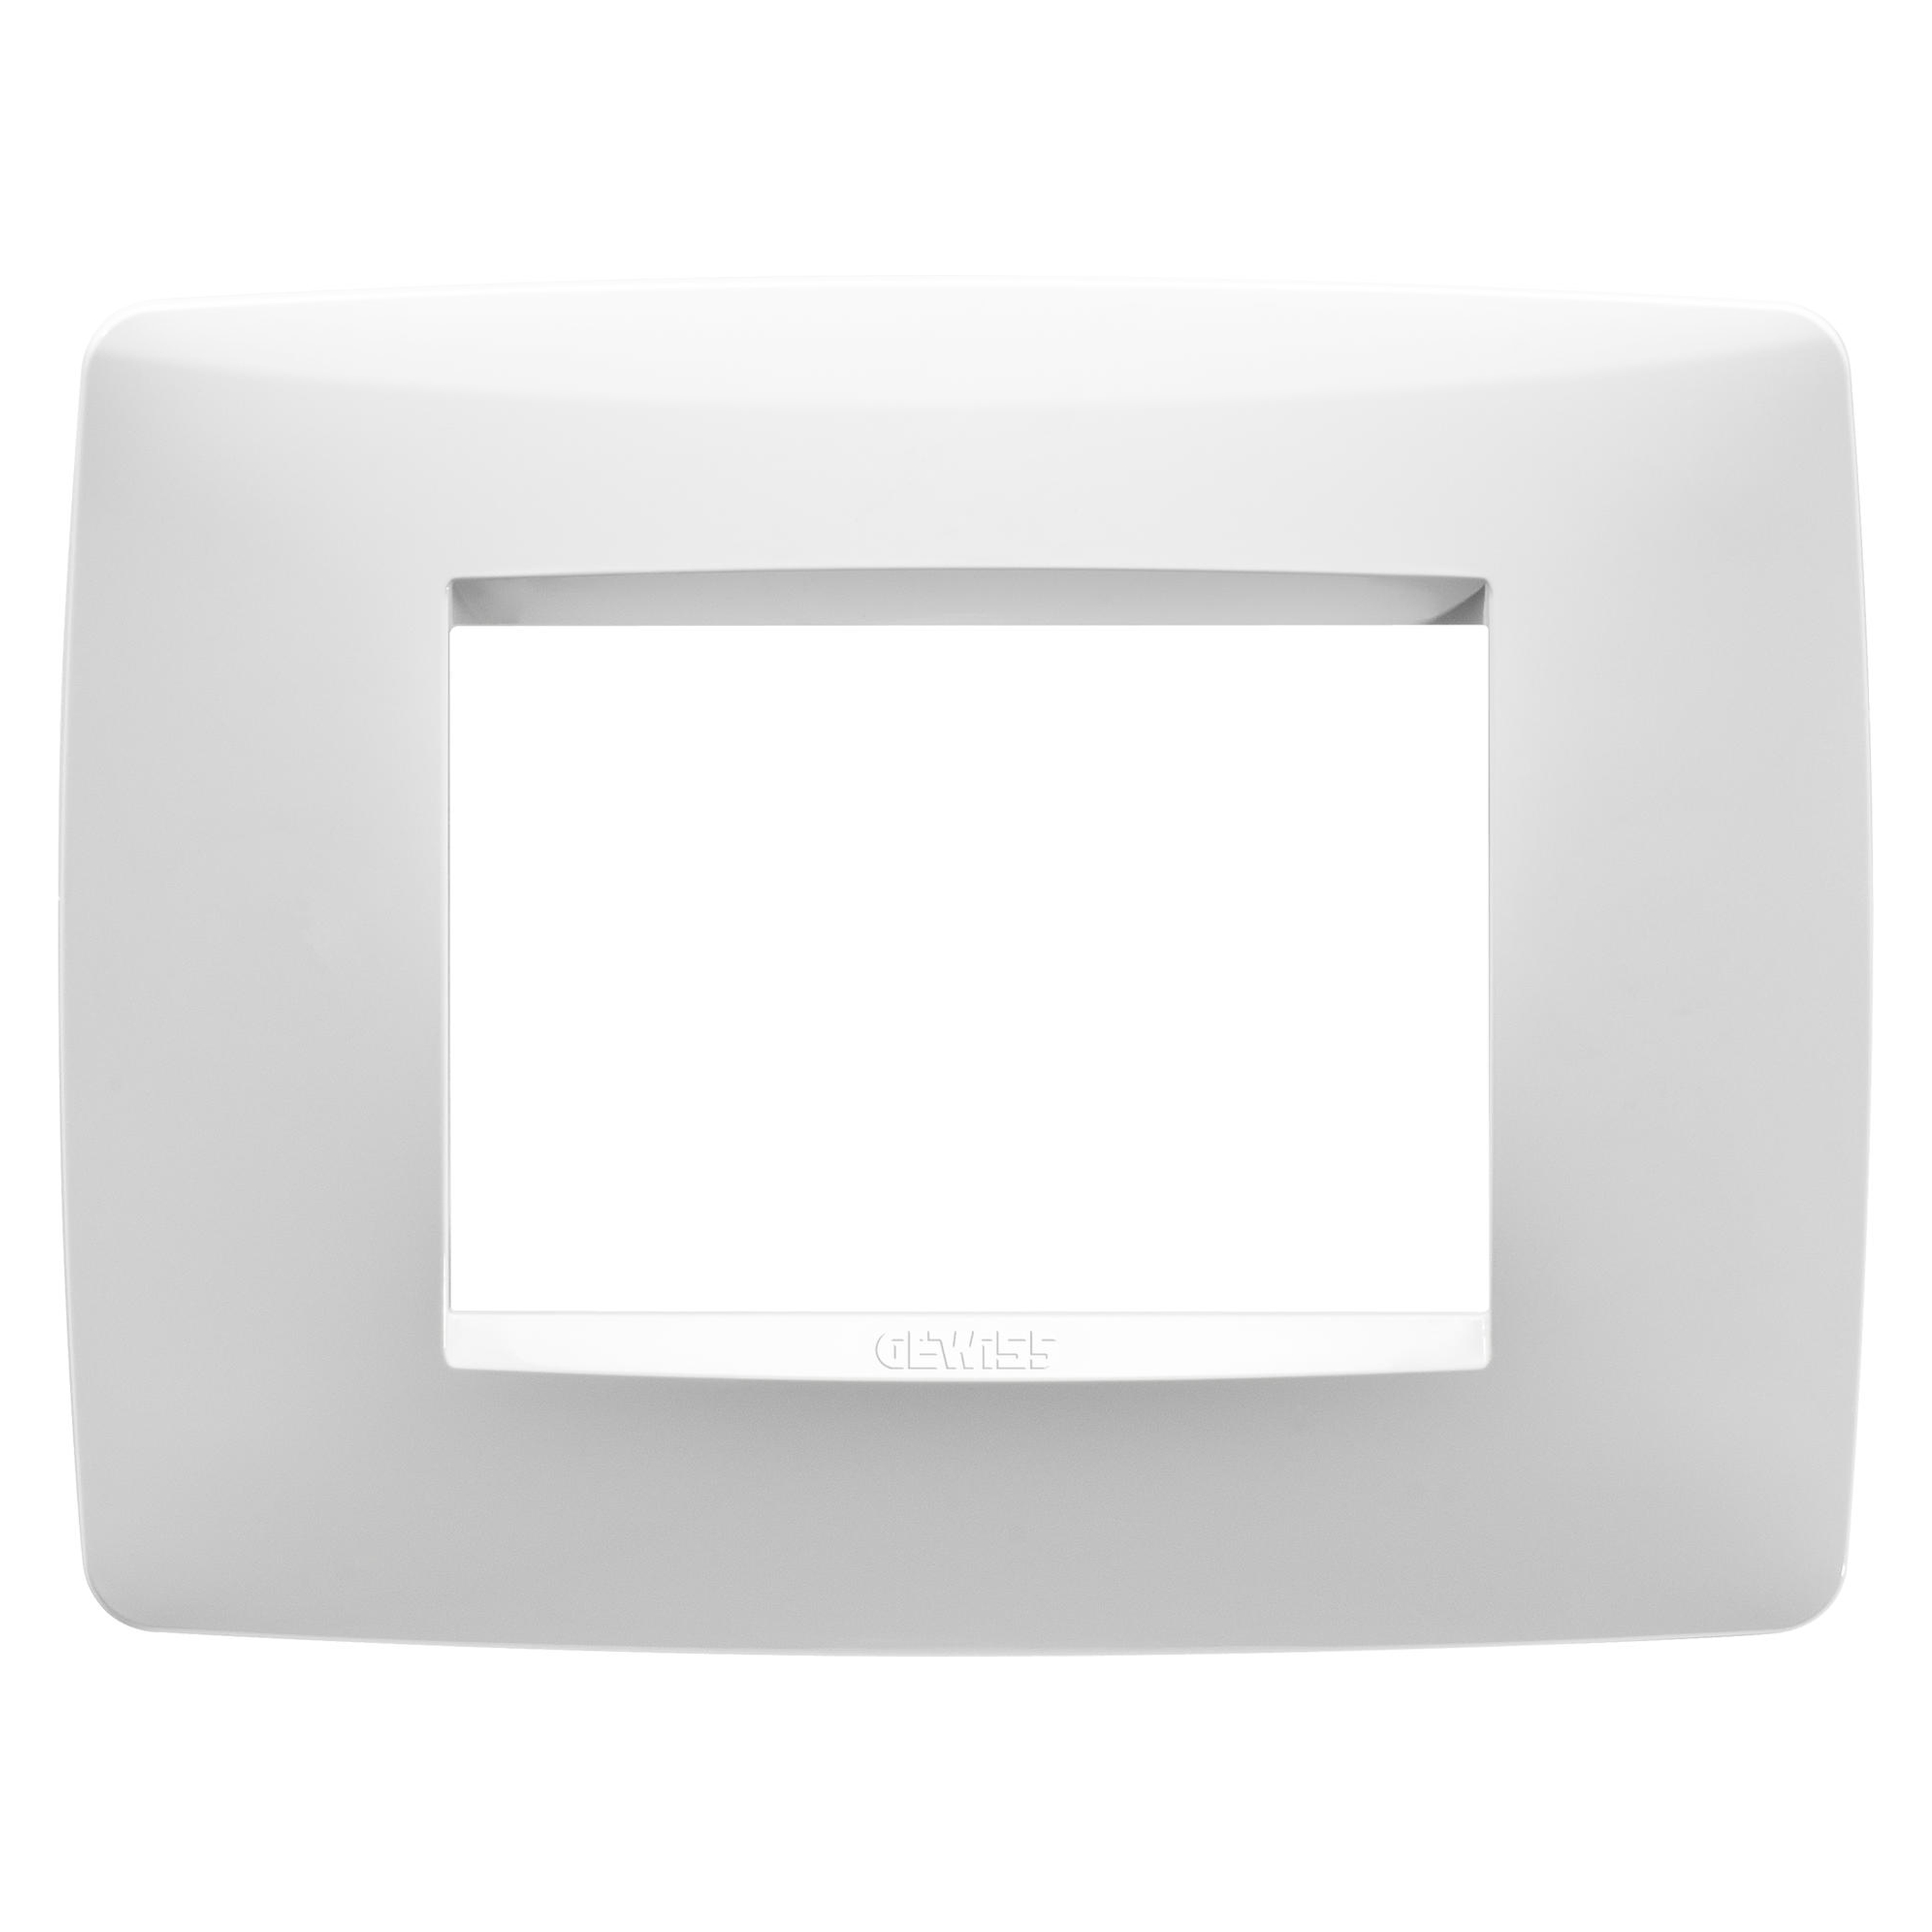 5 Size British Standard Simplicity White Square Edged Plug Sockets and Switches 